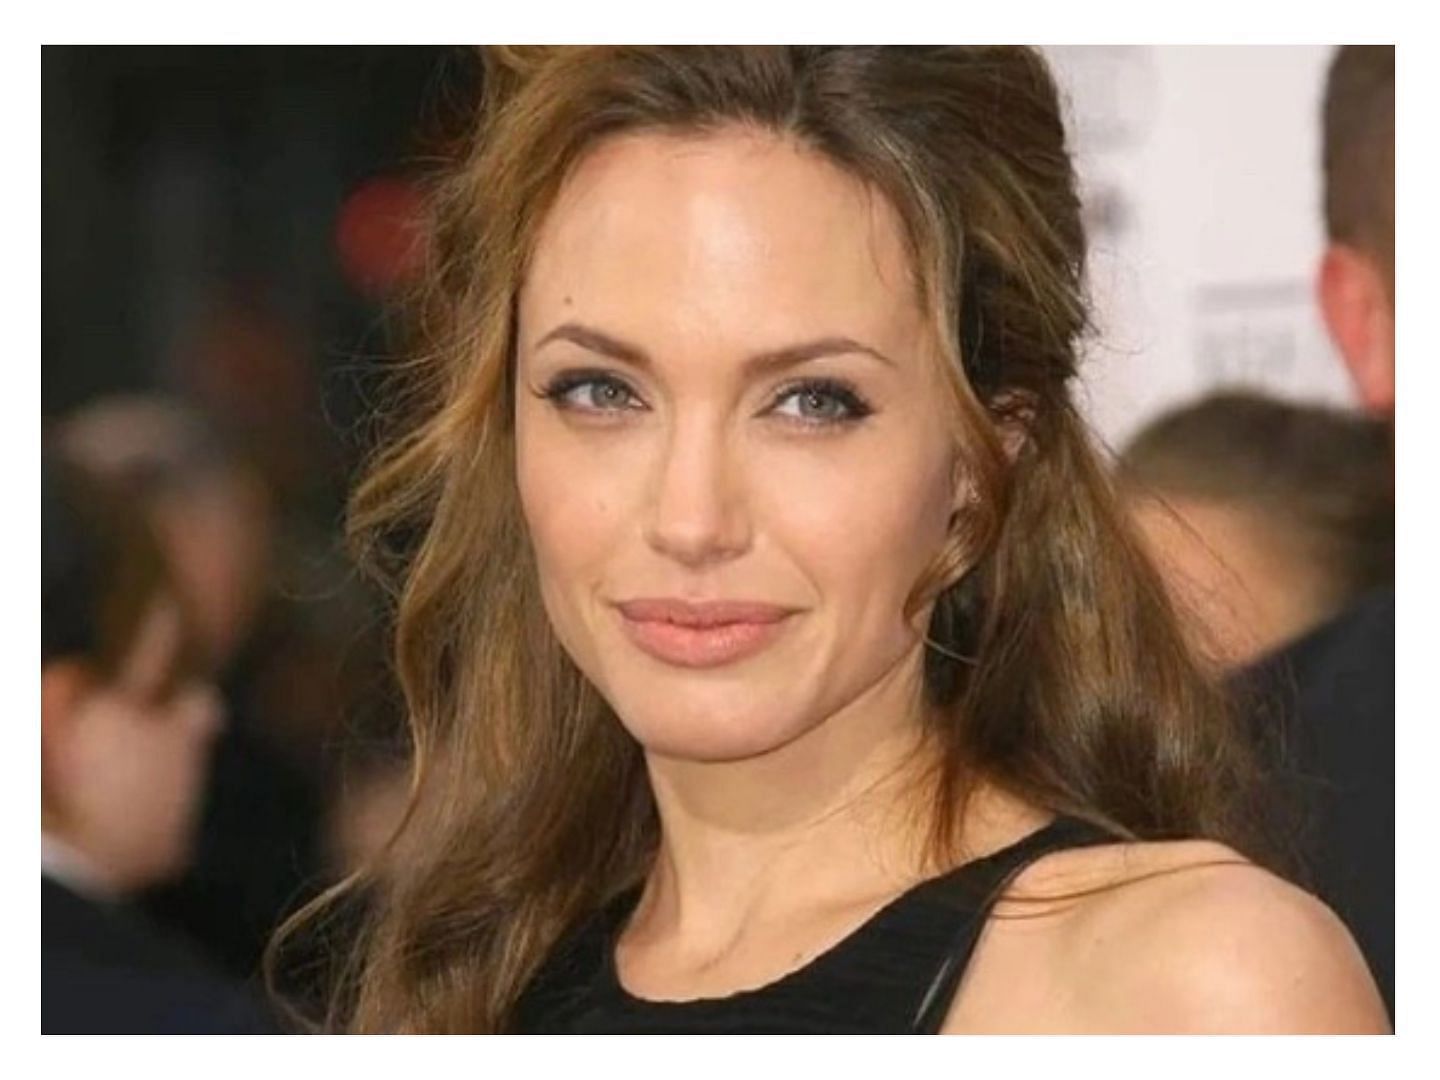 Angelina Jolie changes up her workout routine to stay active and fit. (Image via IG@angelinajolie_00001)